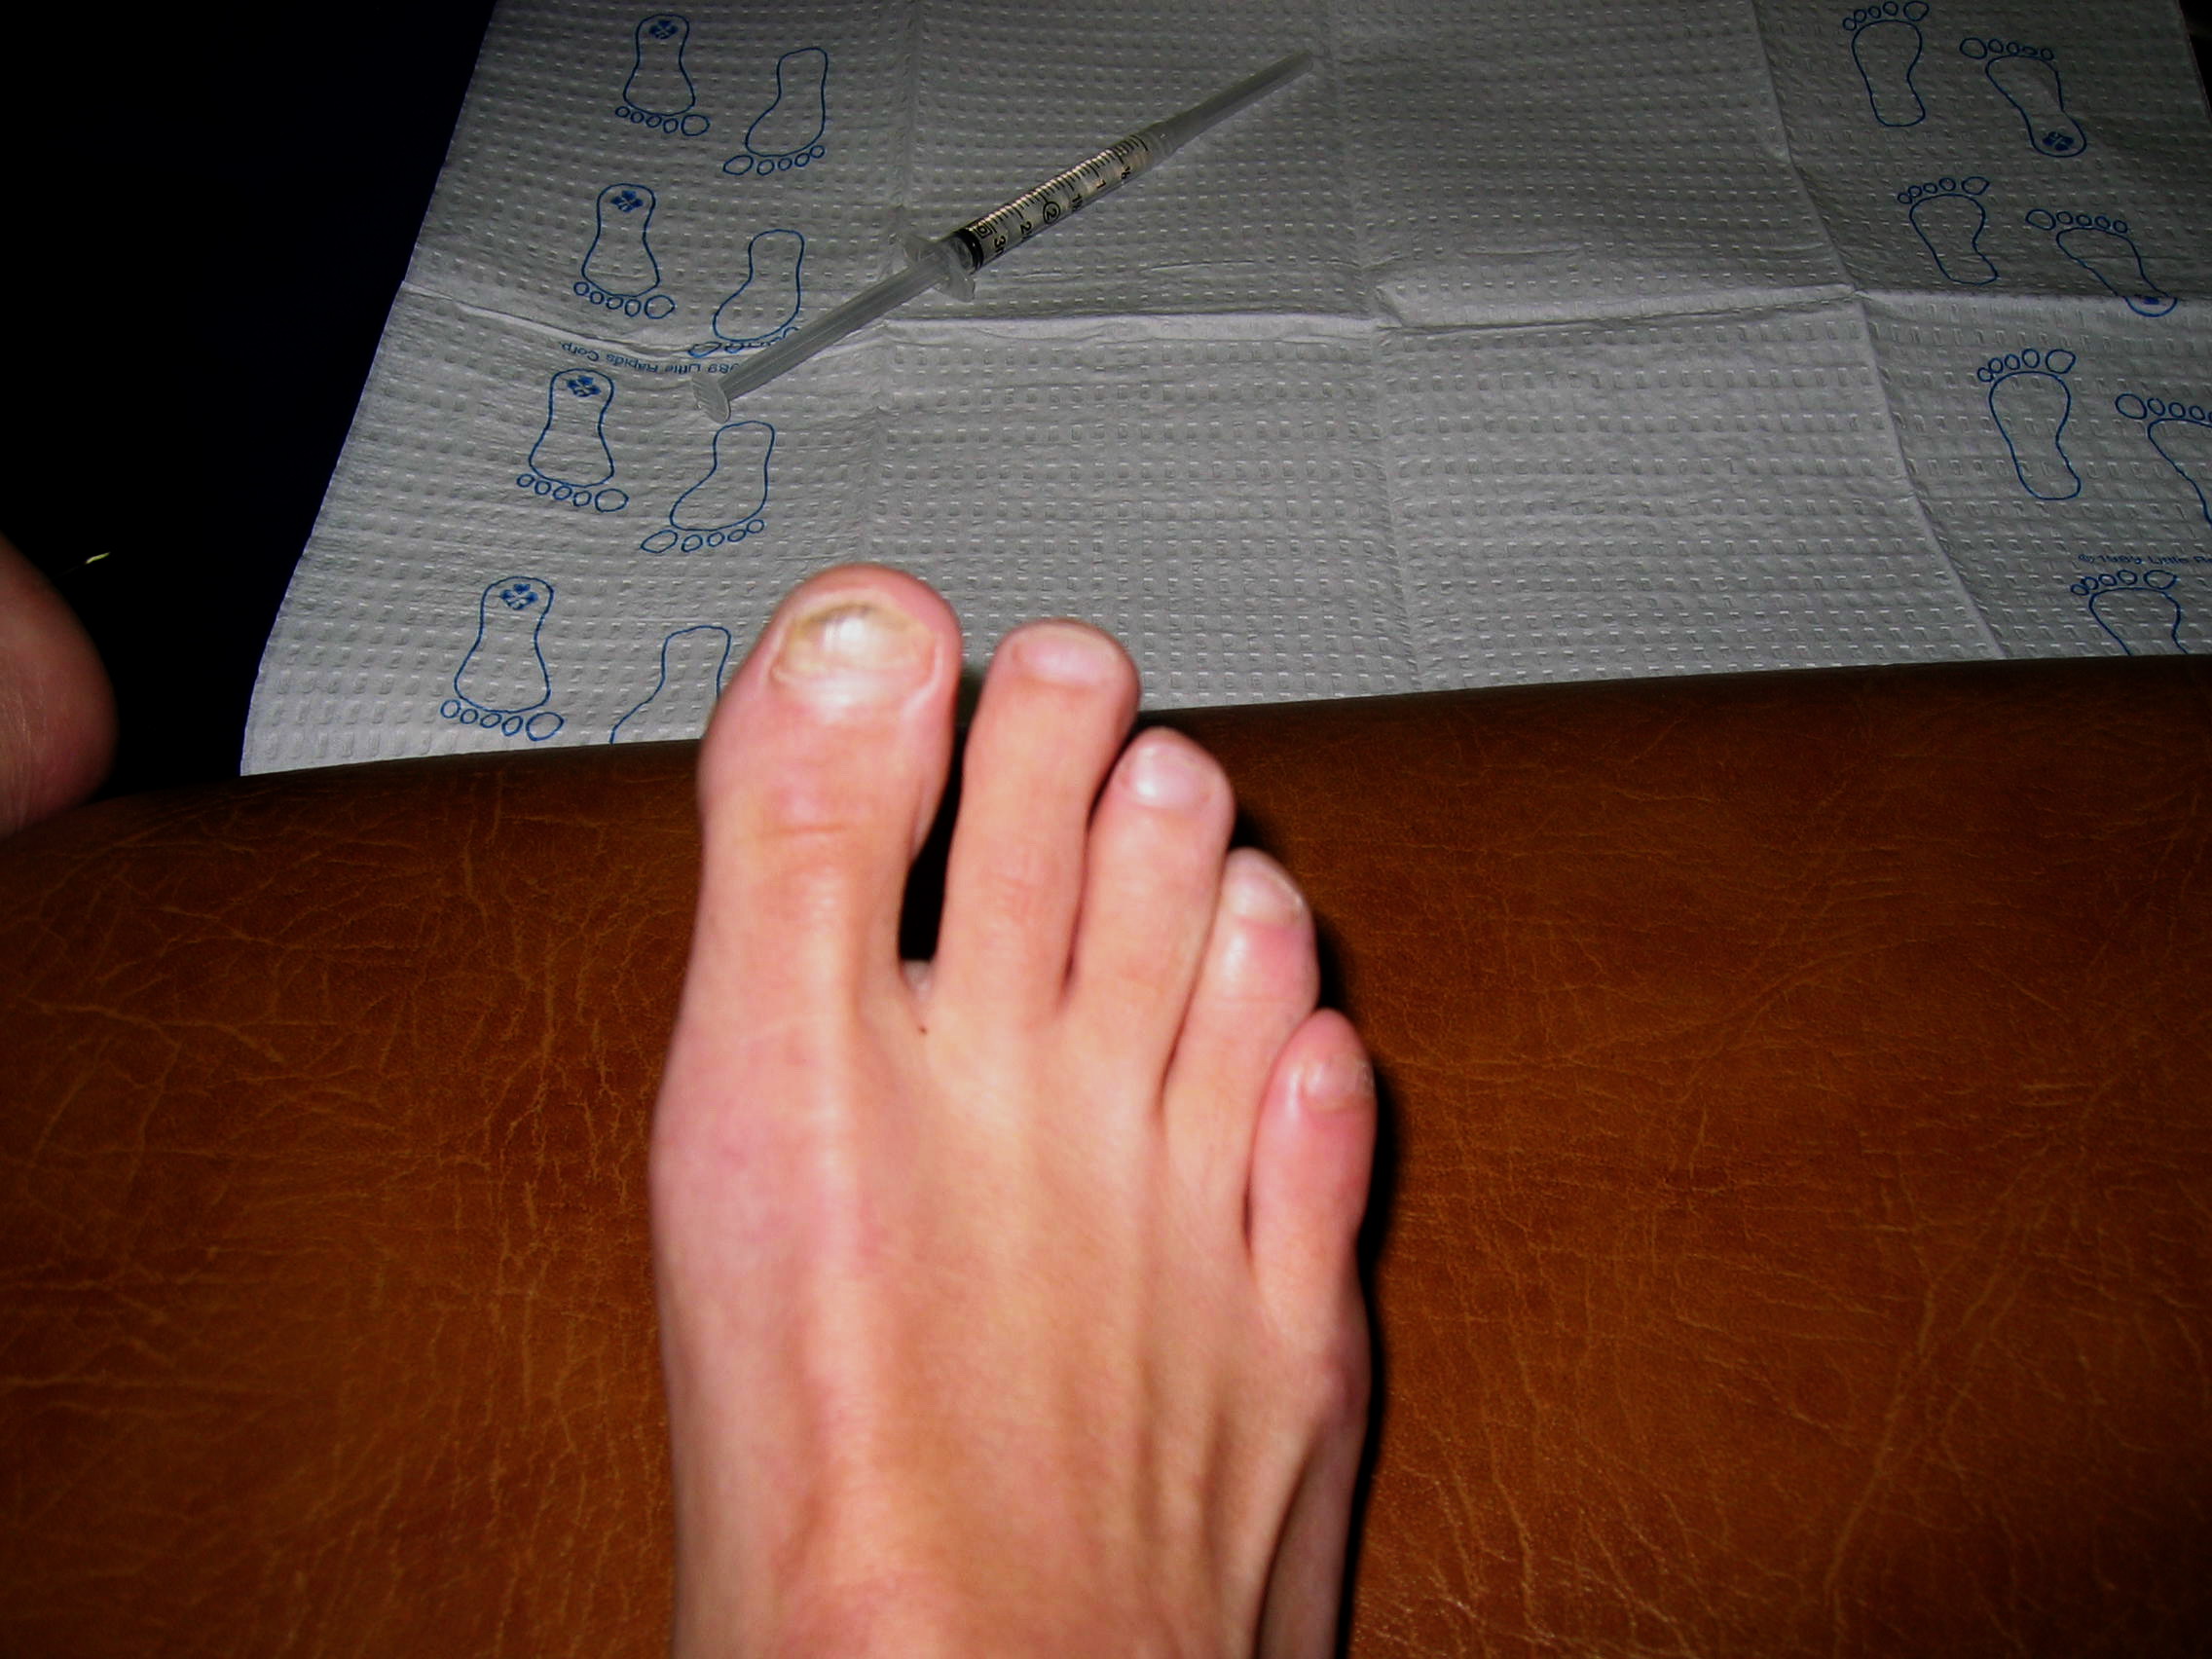 Ingrown and painful. Ive had to have the big toenail removed twice in the past.  This time its for good!